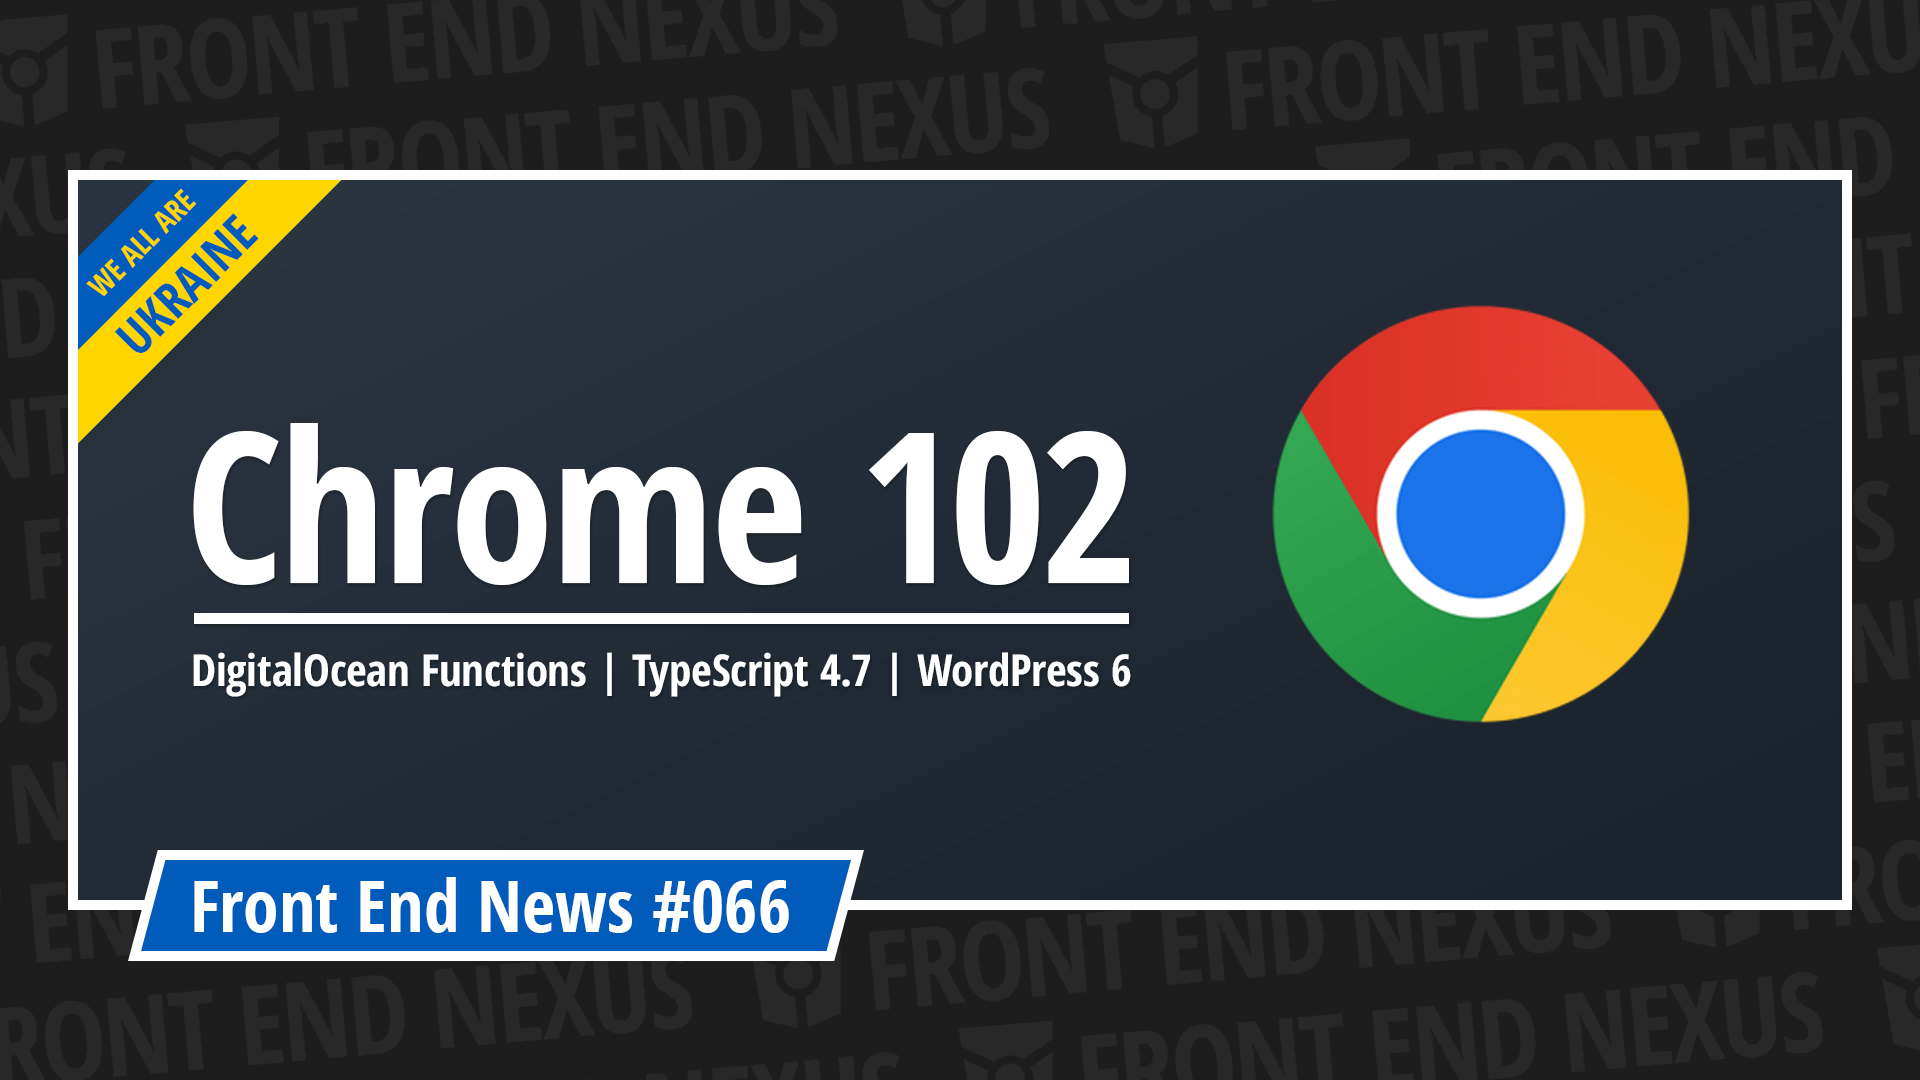 Chrome 102, DigitalOcean Functions, Safari Technology Preview 146, TypeScript 4.7, WordPress 6, and more | Front End News #066